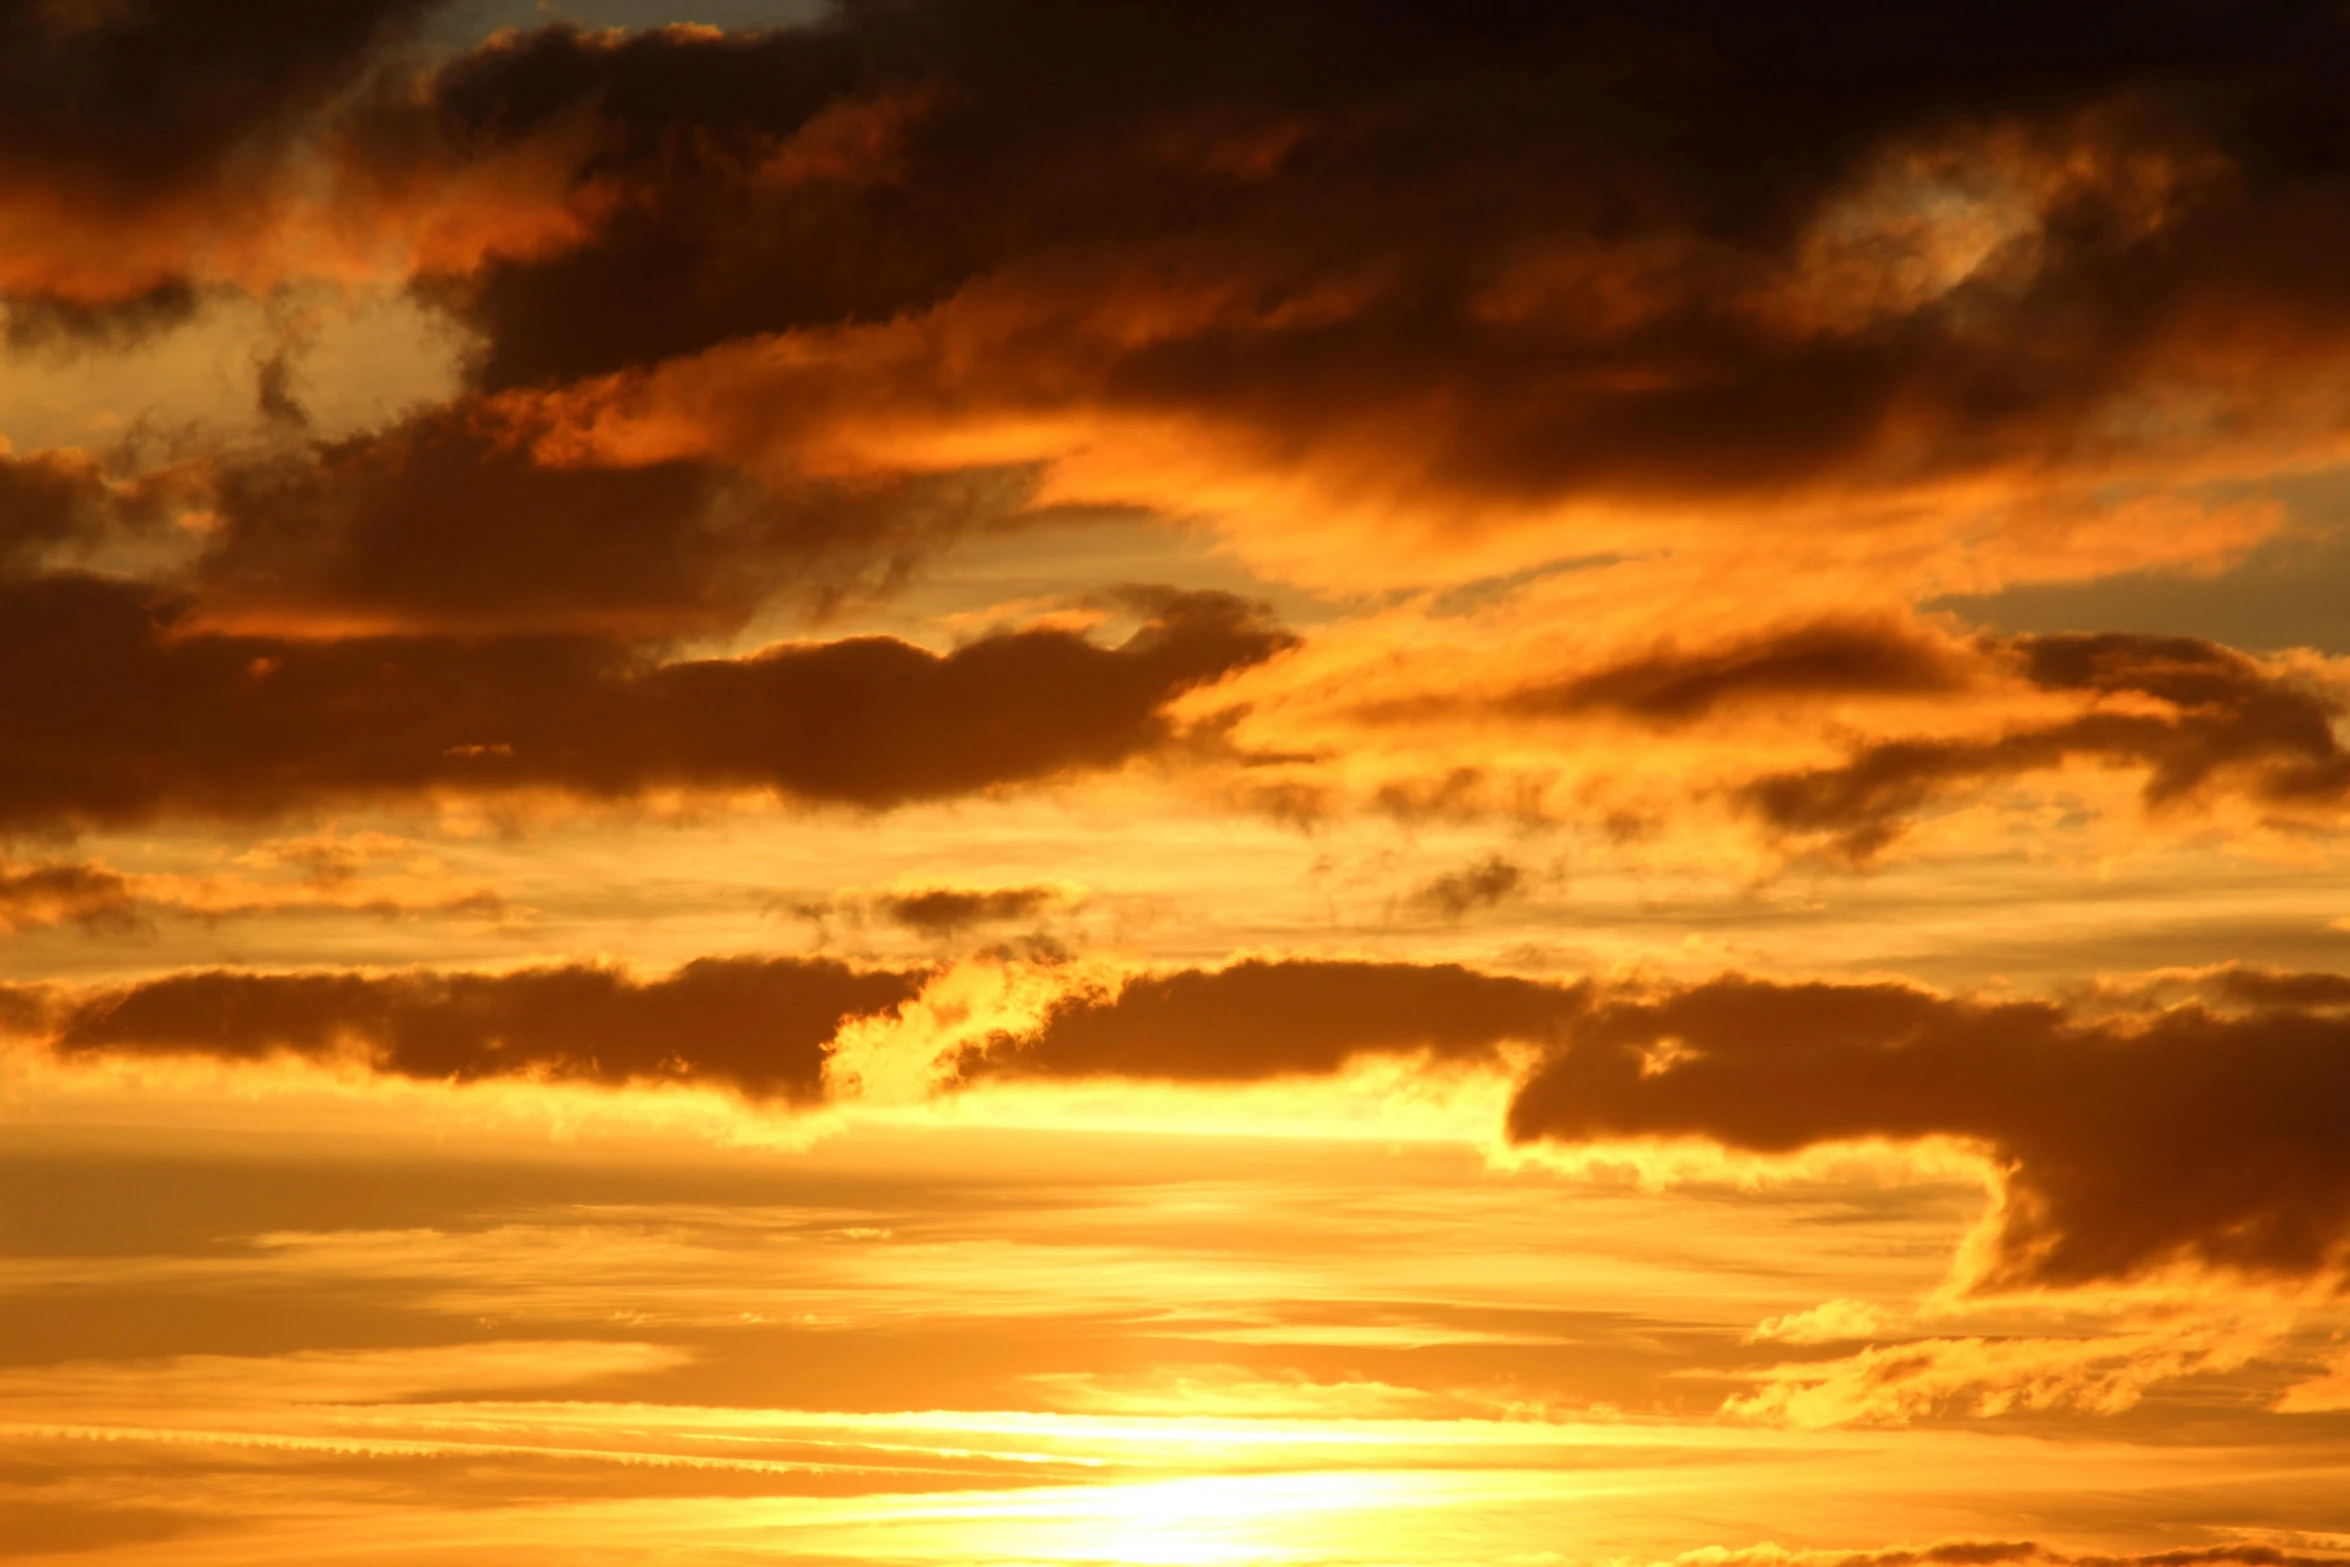 a large body of water under a cloudy sky, an album cover, by Ian Fairweather, pexels, orange sun set, yellow, a close-up, layered stratocumulus clouds